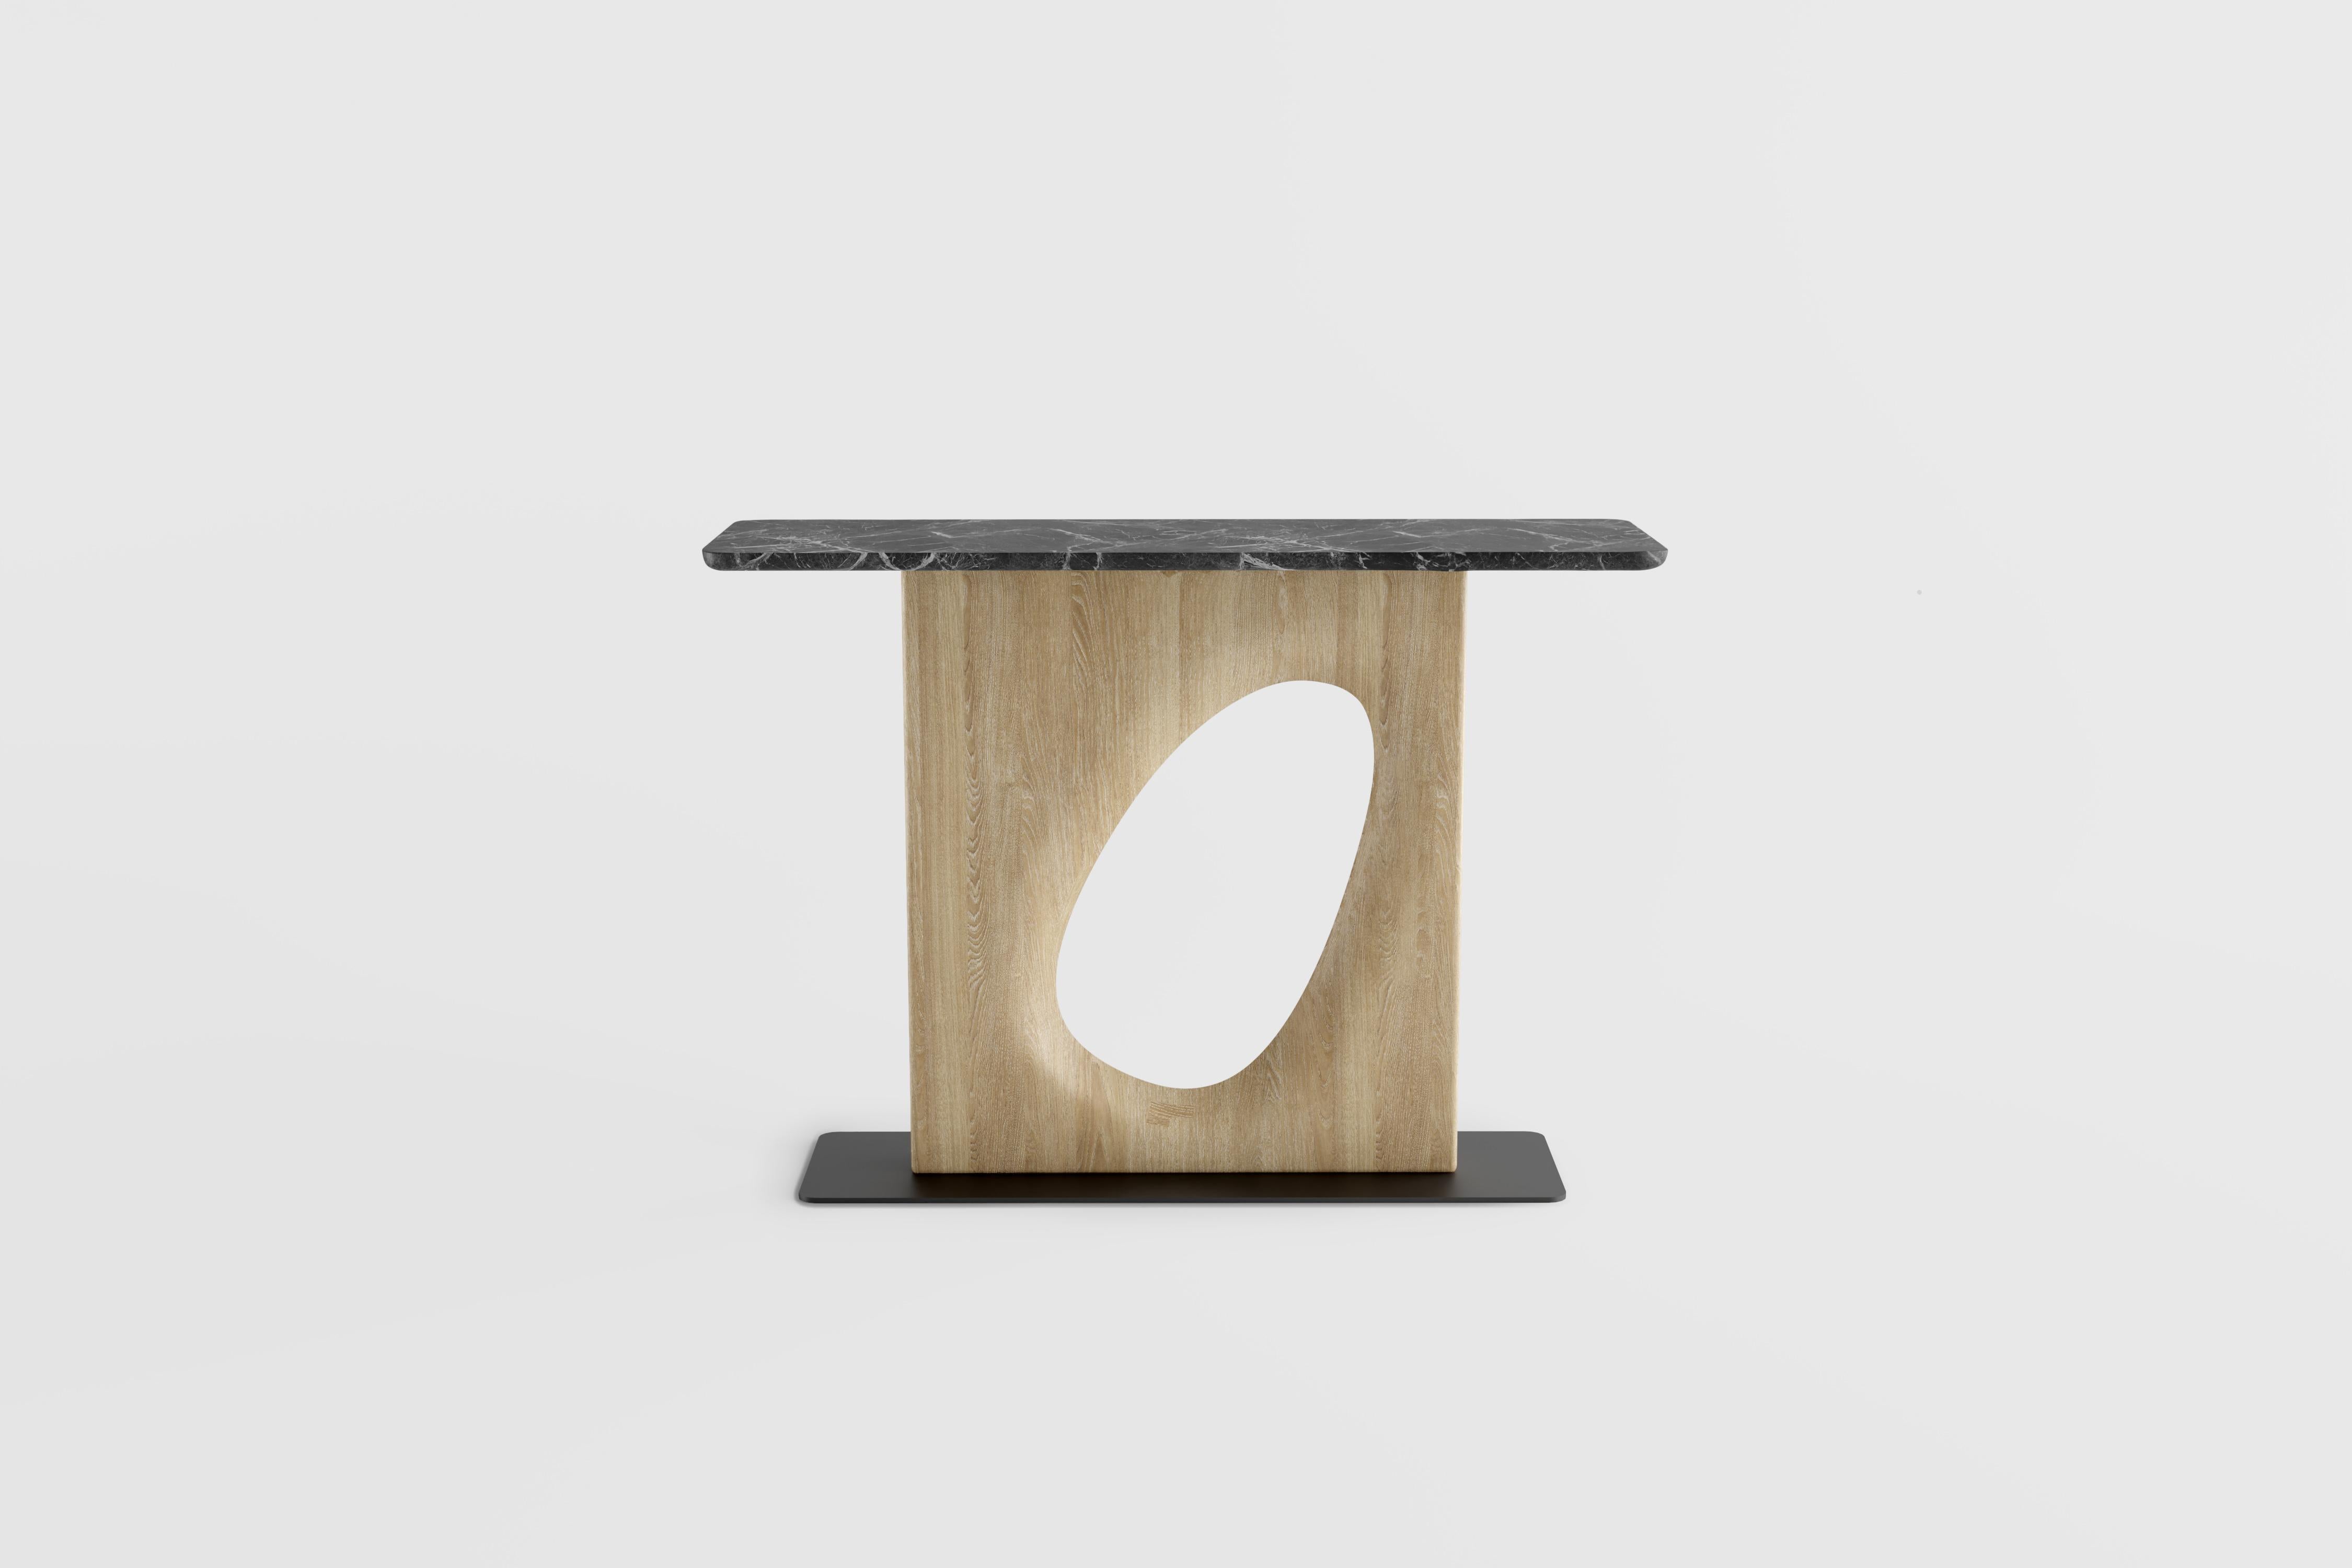 Noviembre XIX, Console Table in Oak Wood inspired by Brancusi, Sideboard by Joel Escalona 

The Noviembre collection is inspired by the creative values of Constantin Brancusi, a Romanian sculptor considered one of the most influential artists of the